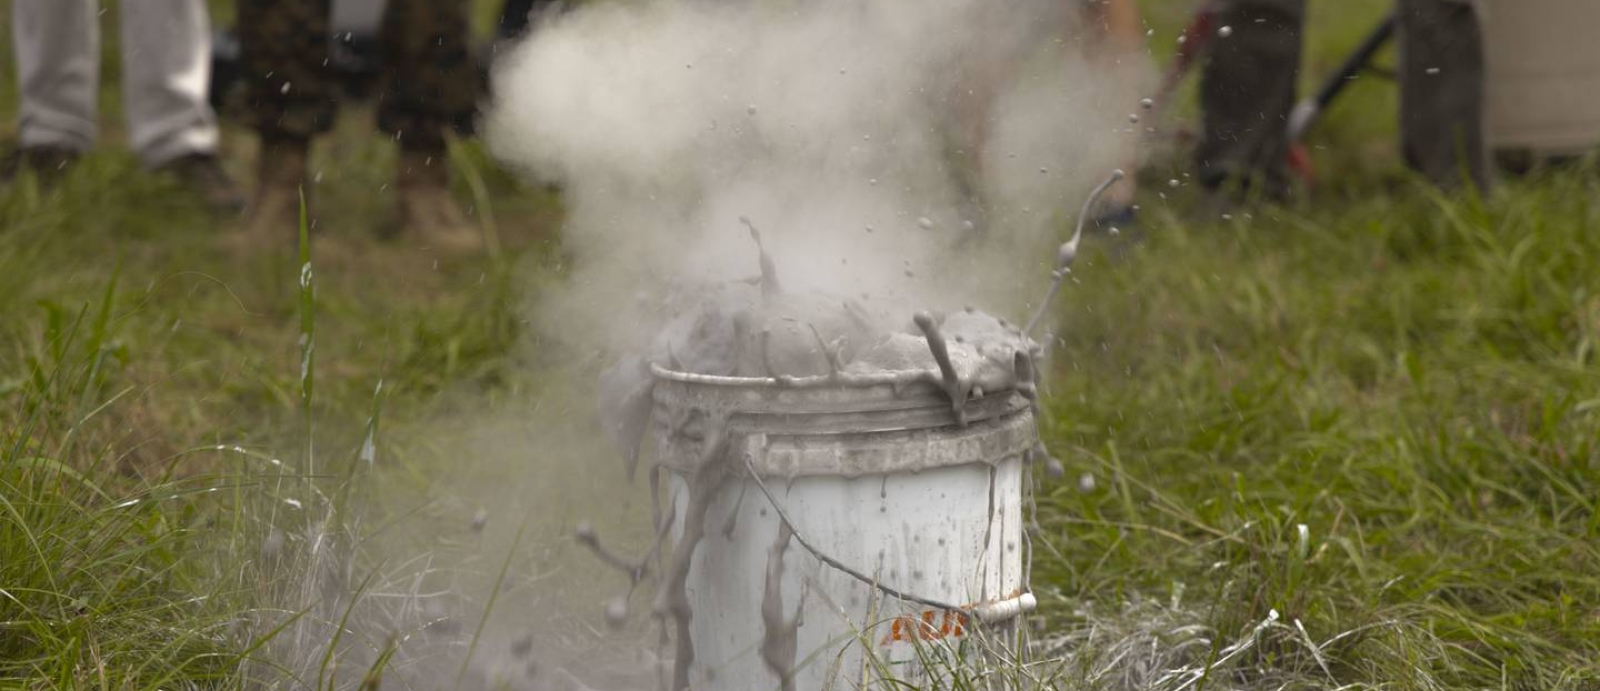 A bucket with silver liquid and gas frothing out of it, on a grassy field.